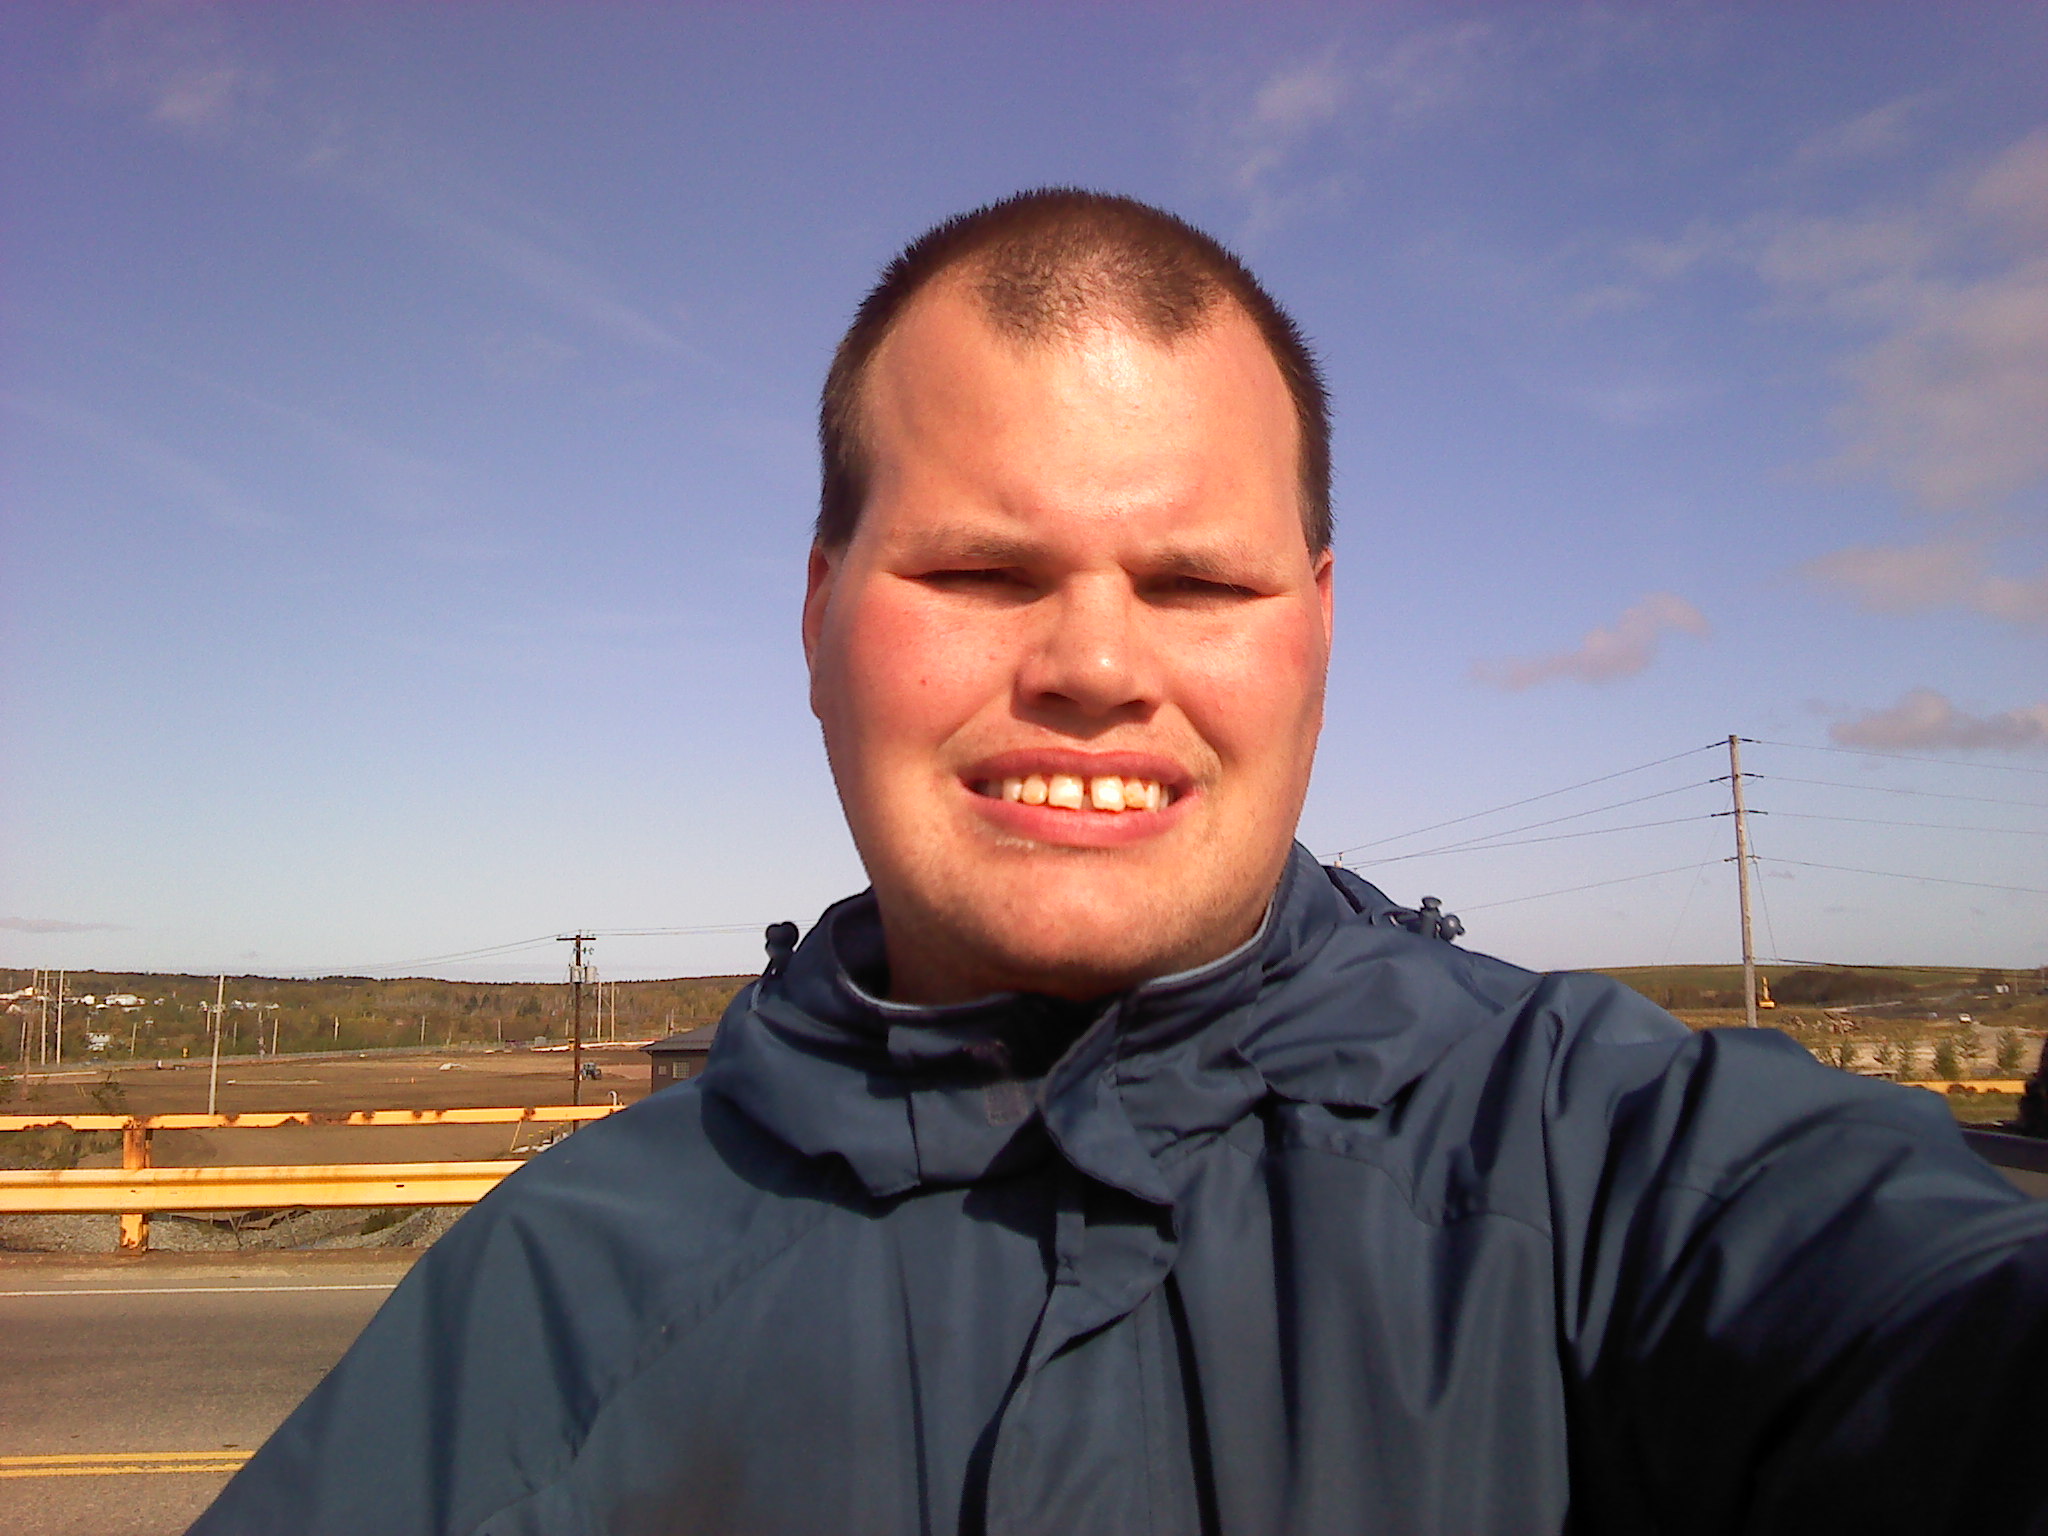 Here is Frankie MacDonald going for a walk today and i am enjoying going for a walk to i like to Say Hi to the 102.1 the Edge Toronto Radio Station.